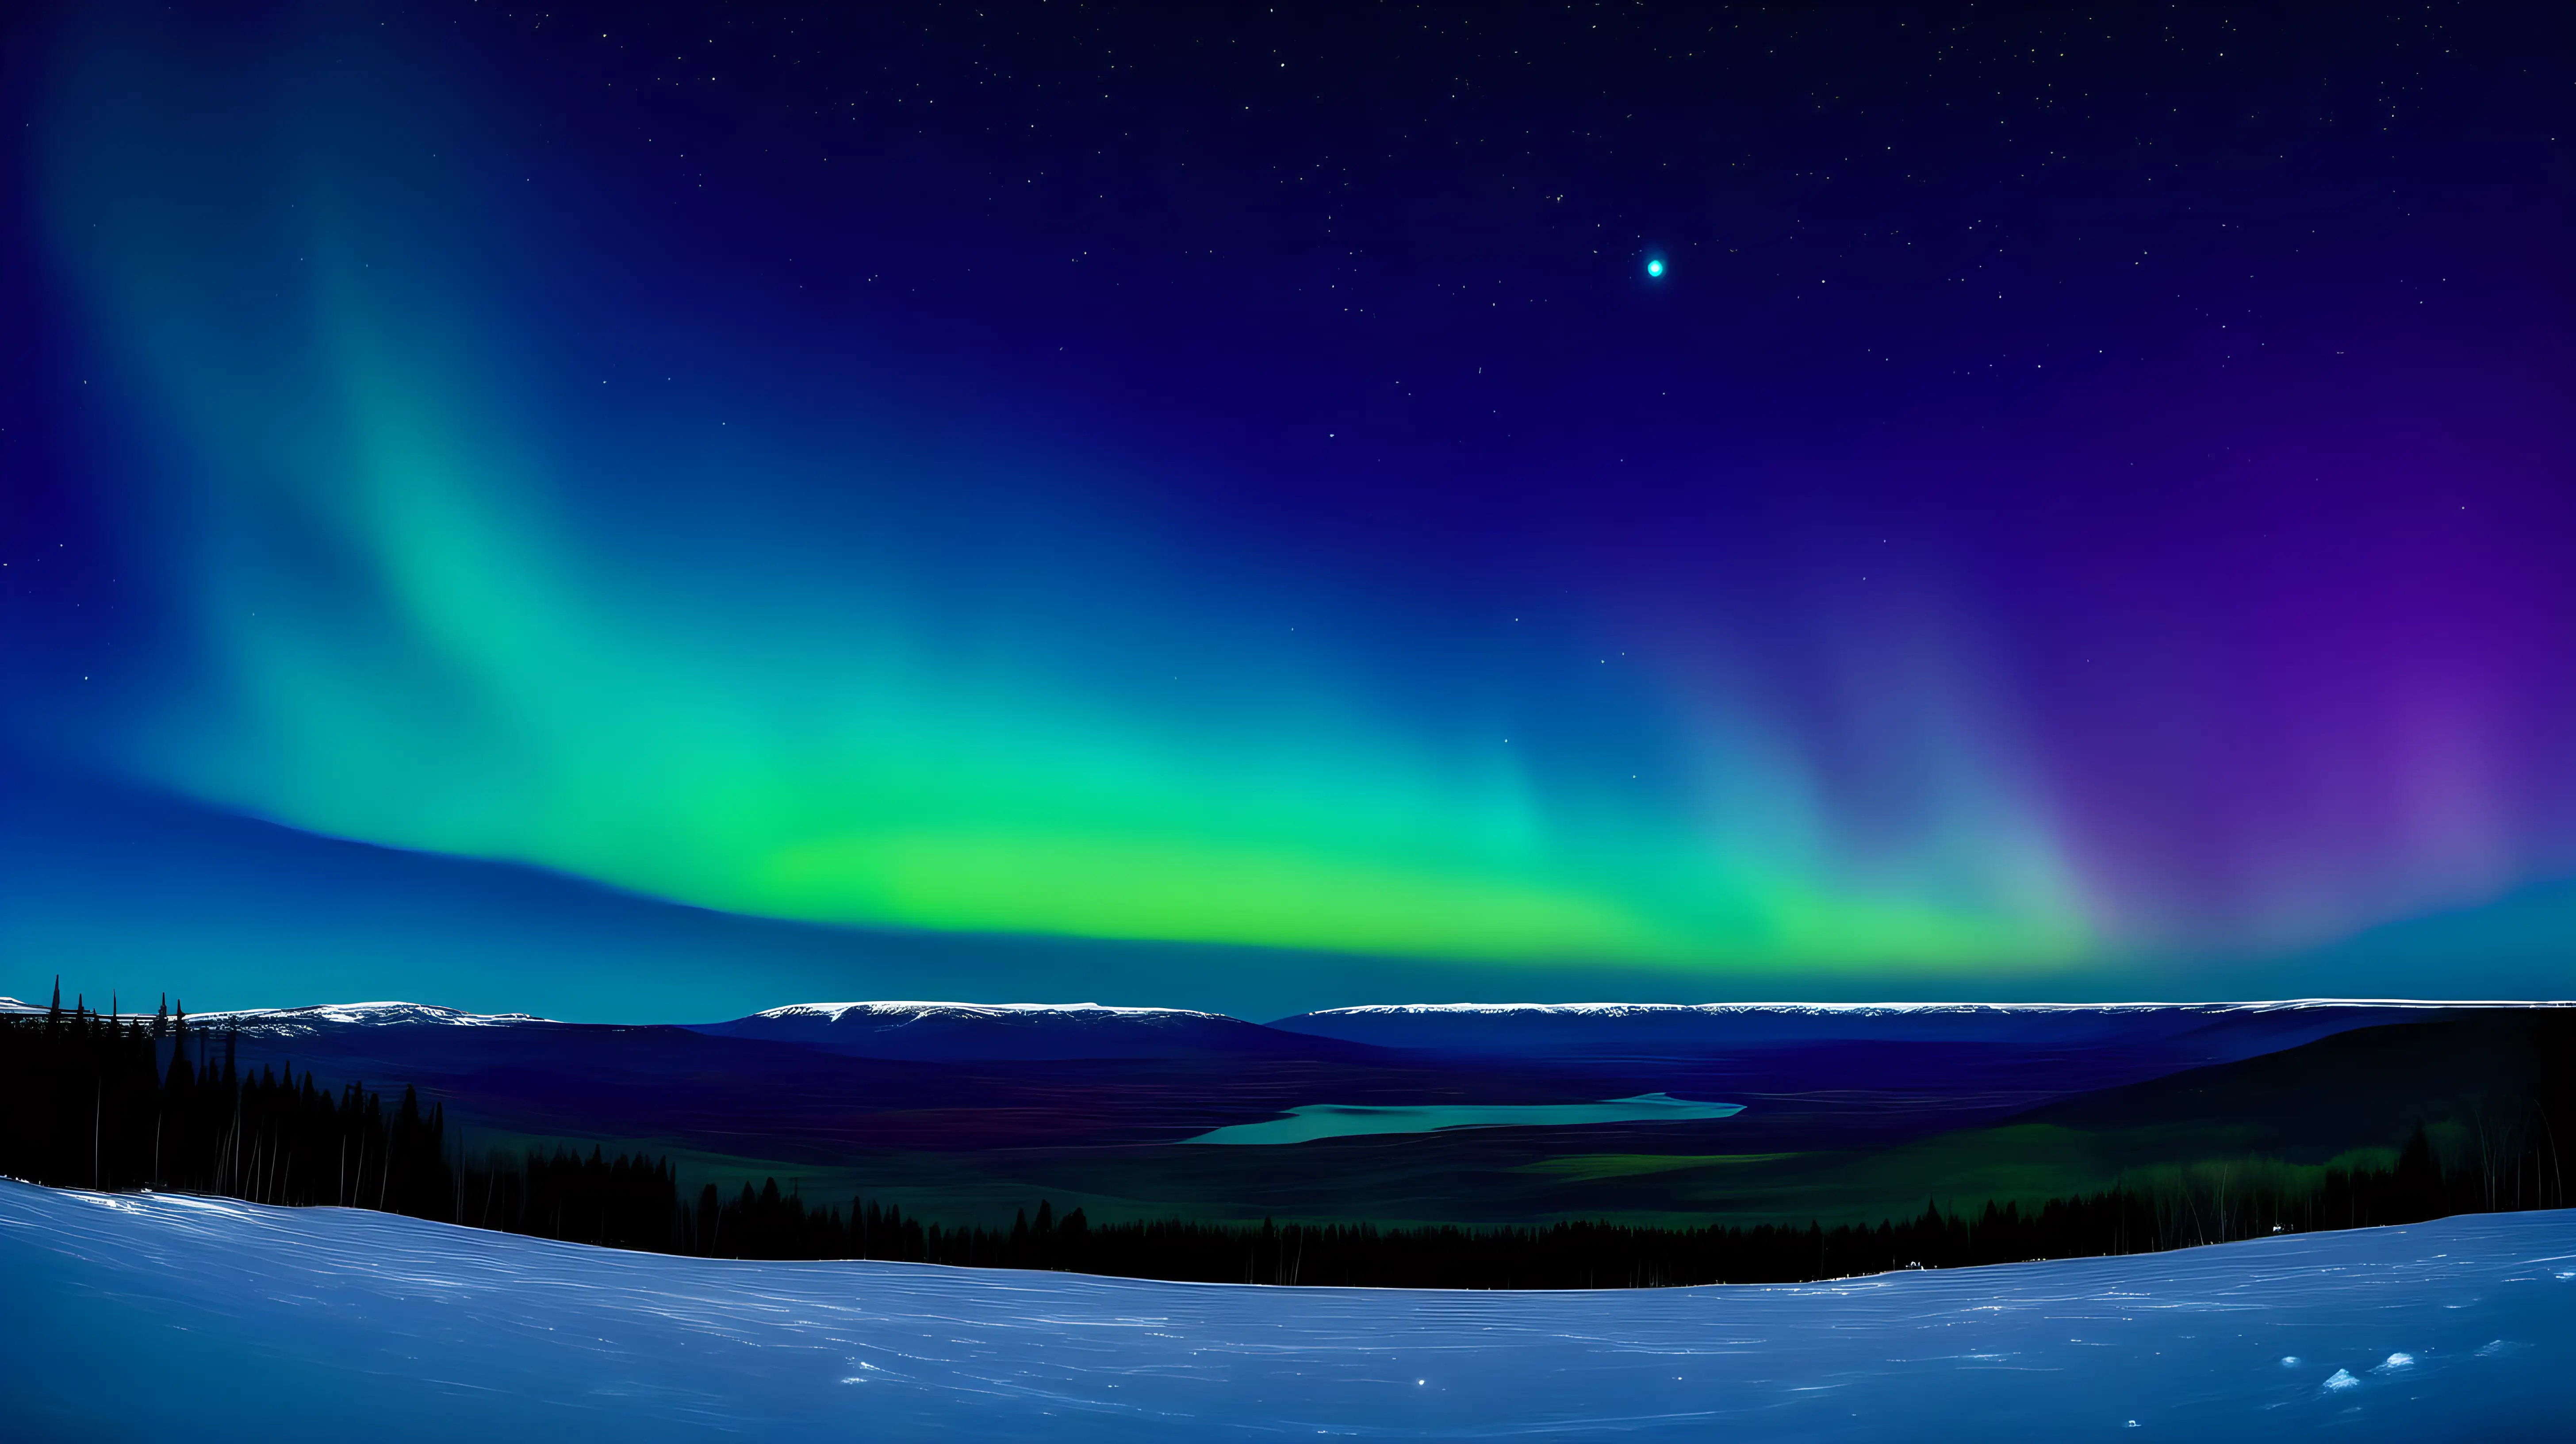 aurora skies, with a small full moon at the top, with a lot of stars in the sky, colorful aqua blues, purples, greens, yellows with a flat horizon,  no ground, no mountains, no snow, no trees, no trees, no mountains, no earth, only sky









